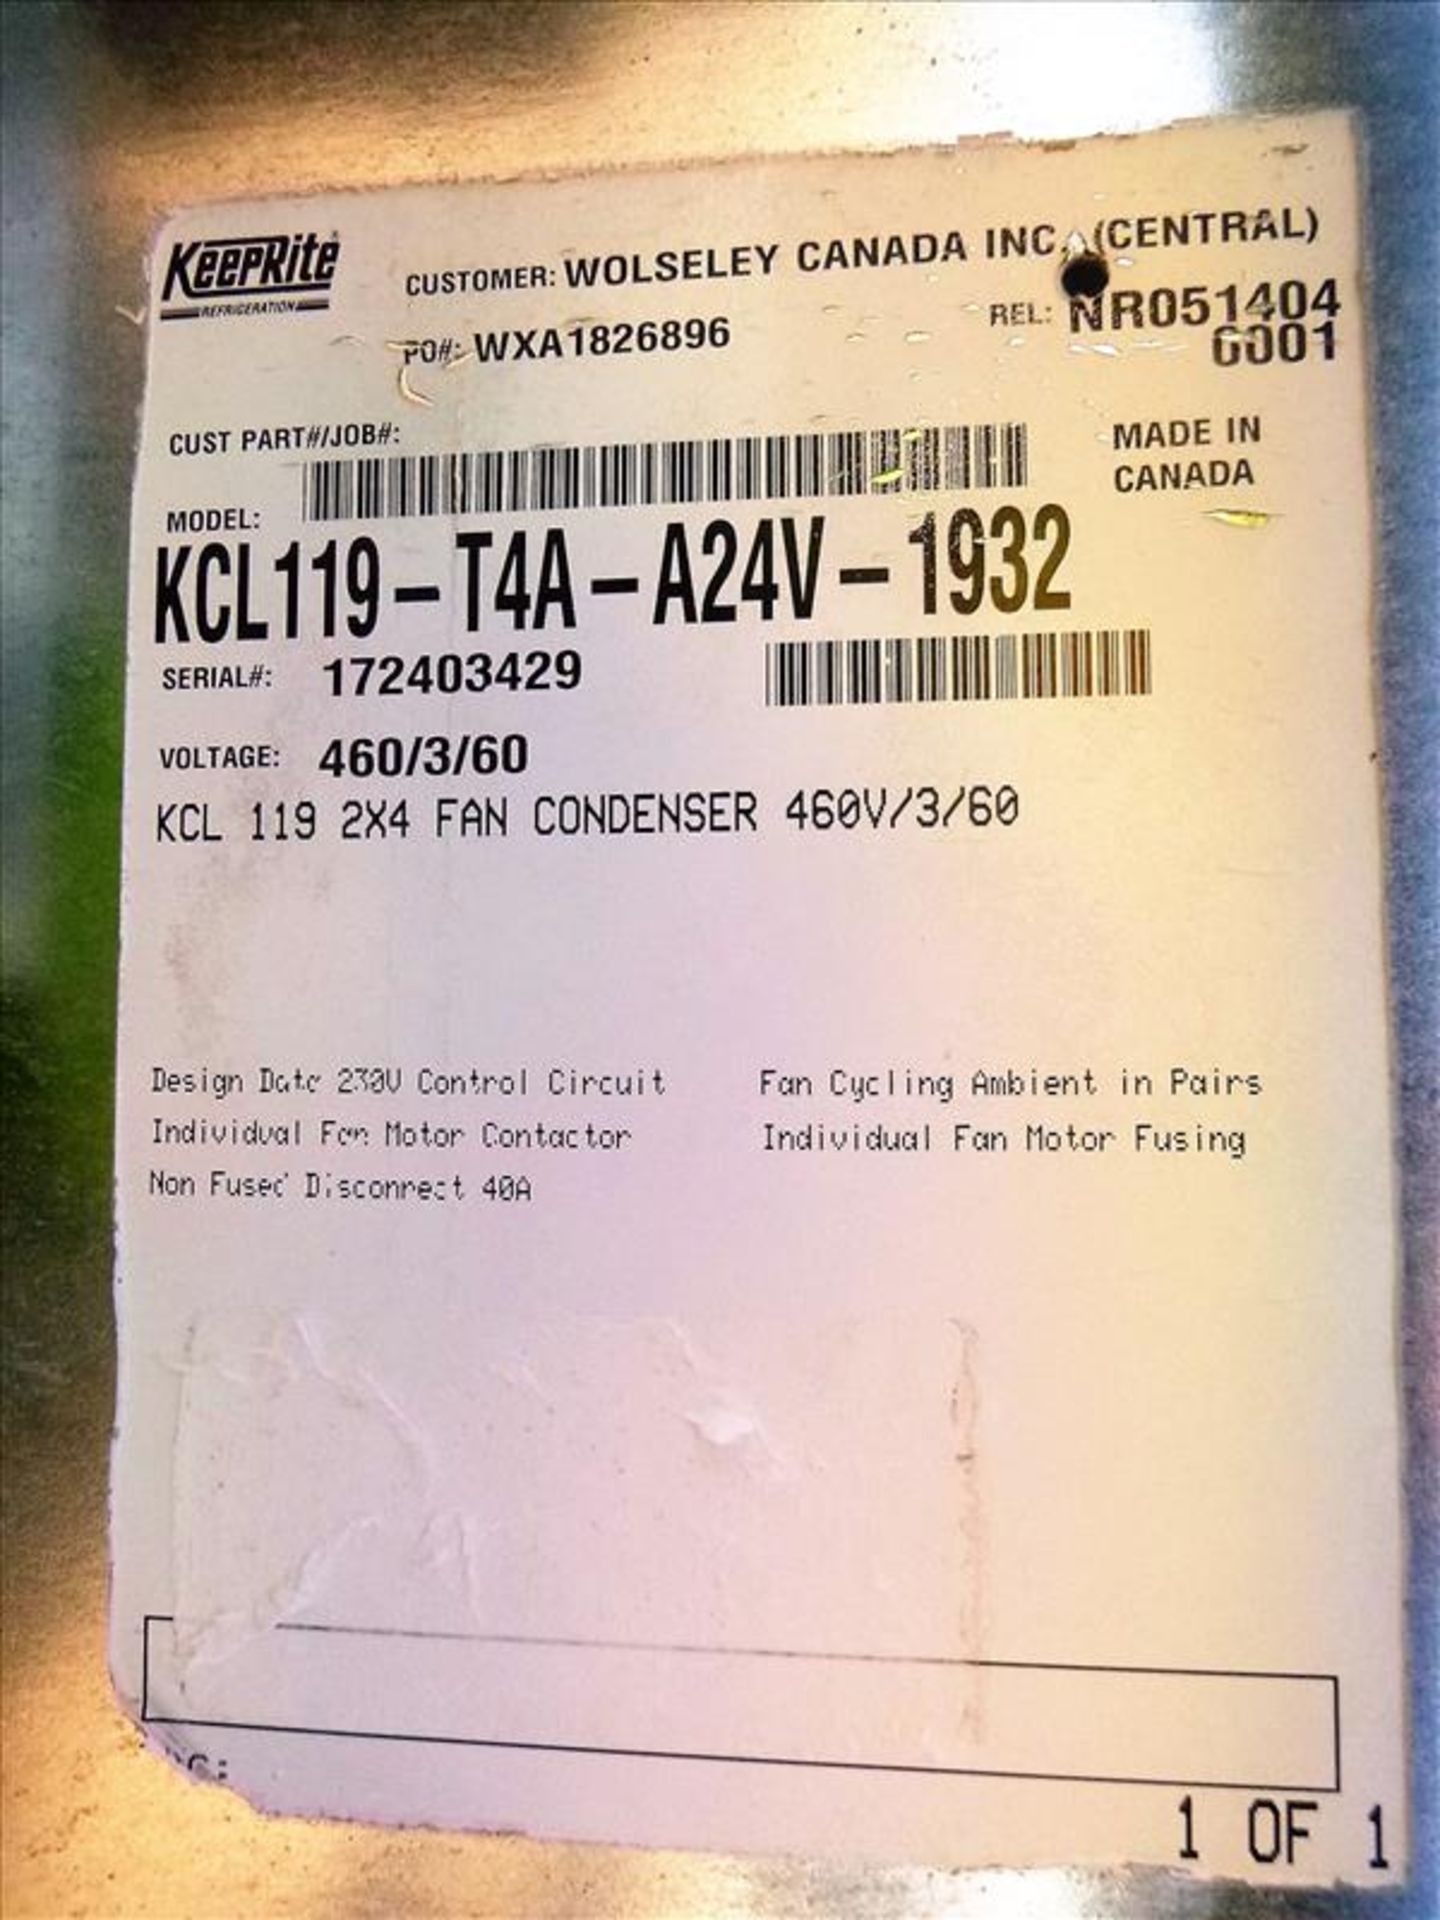 KEEPRITE KCL119-T4A-A24V-1932 Remote Condenser, s/n 172403429, 2x4-Fan - Image 3 of 4